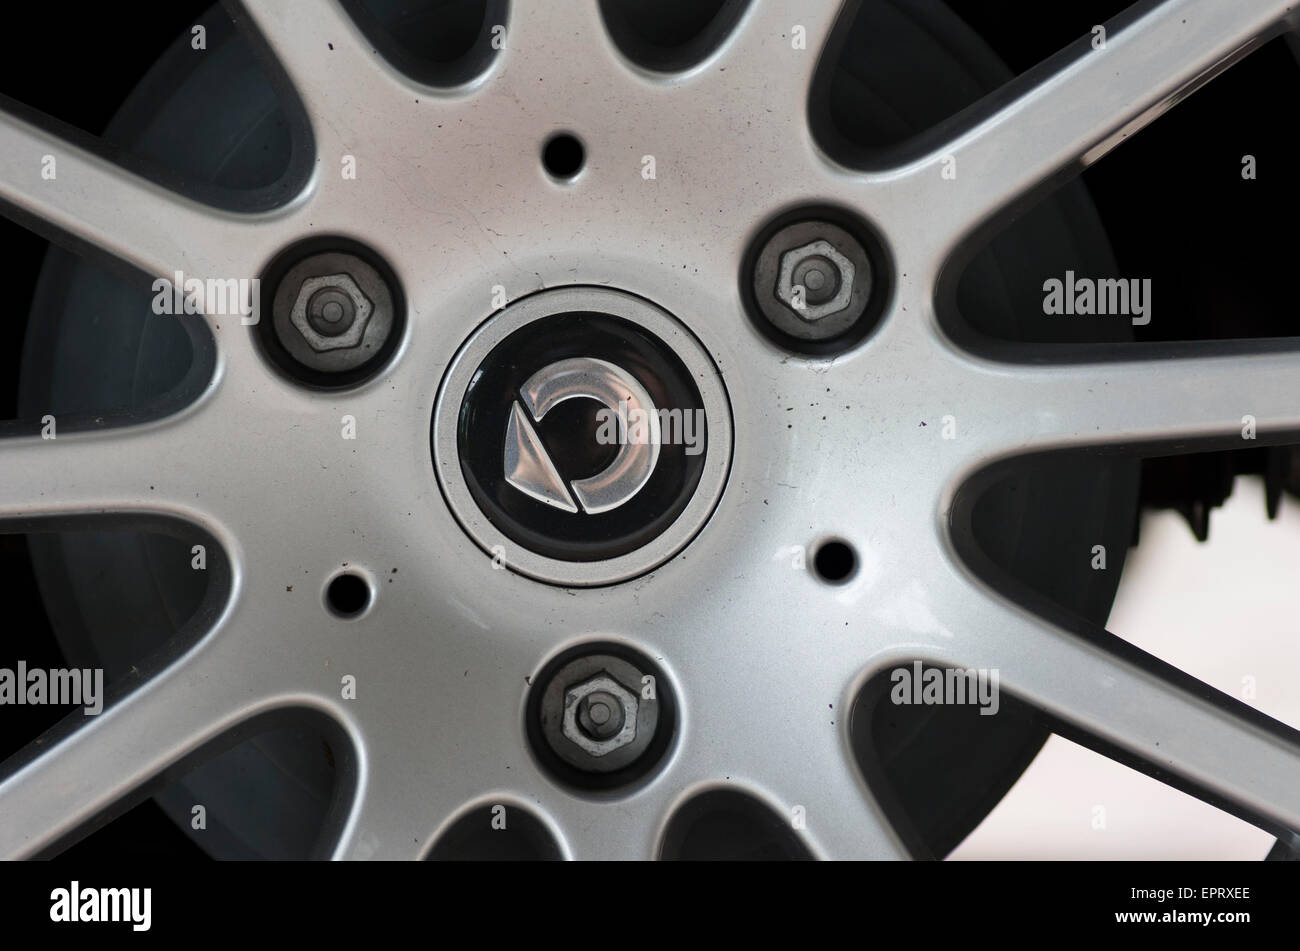 SMART alloy wheel with logo - SAMRT is a division of DAIMLER AG a well known German premium, sport and luxury car maker Stock Photo